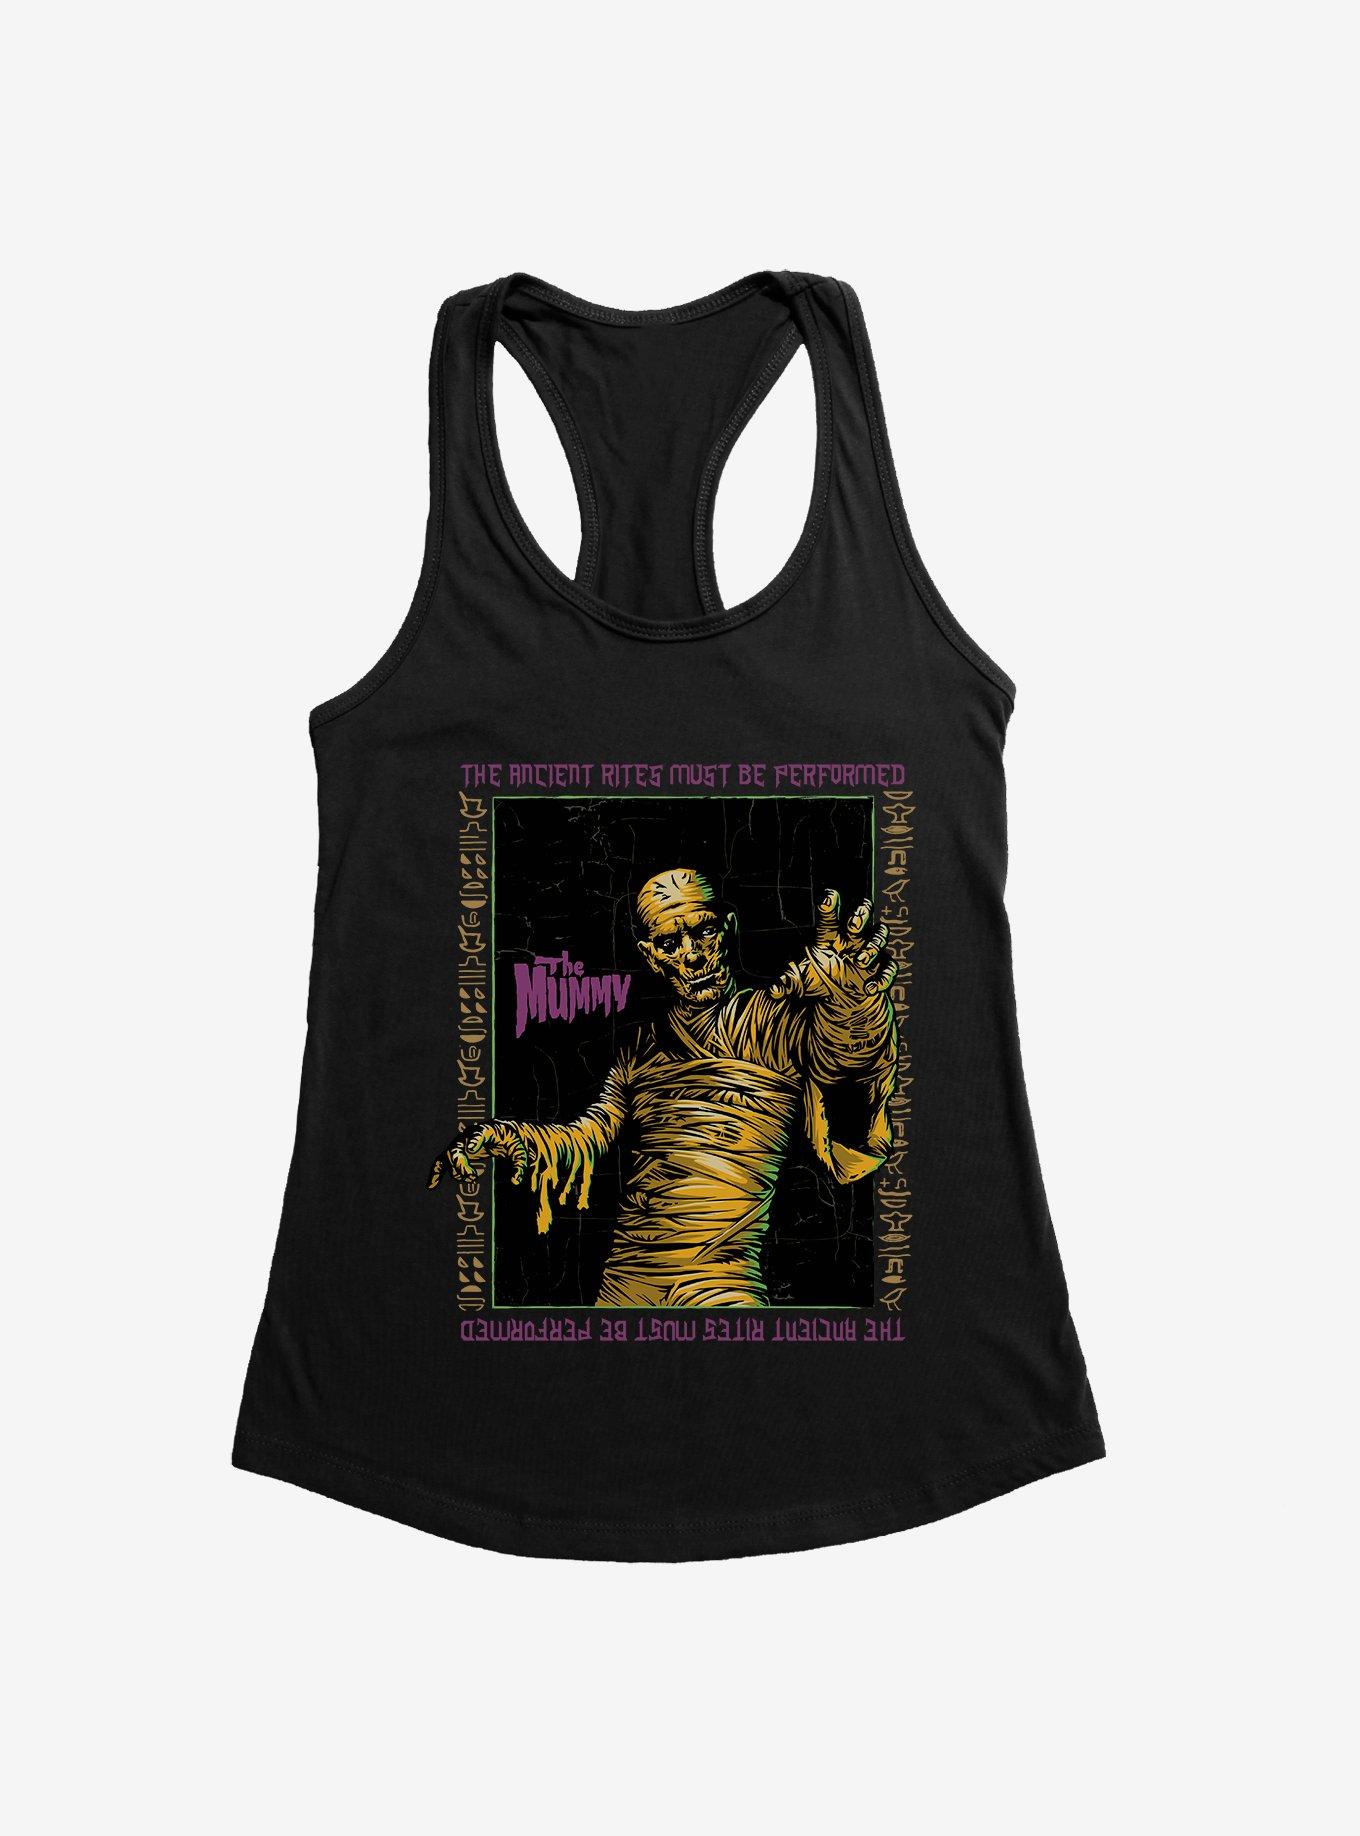 Universal Monsters The Mummy Ancient Rites Must Be Performed Girls Tank, BLACK, hi-res